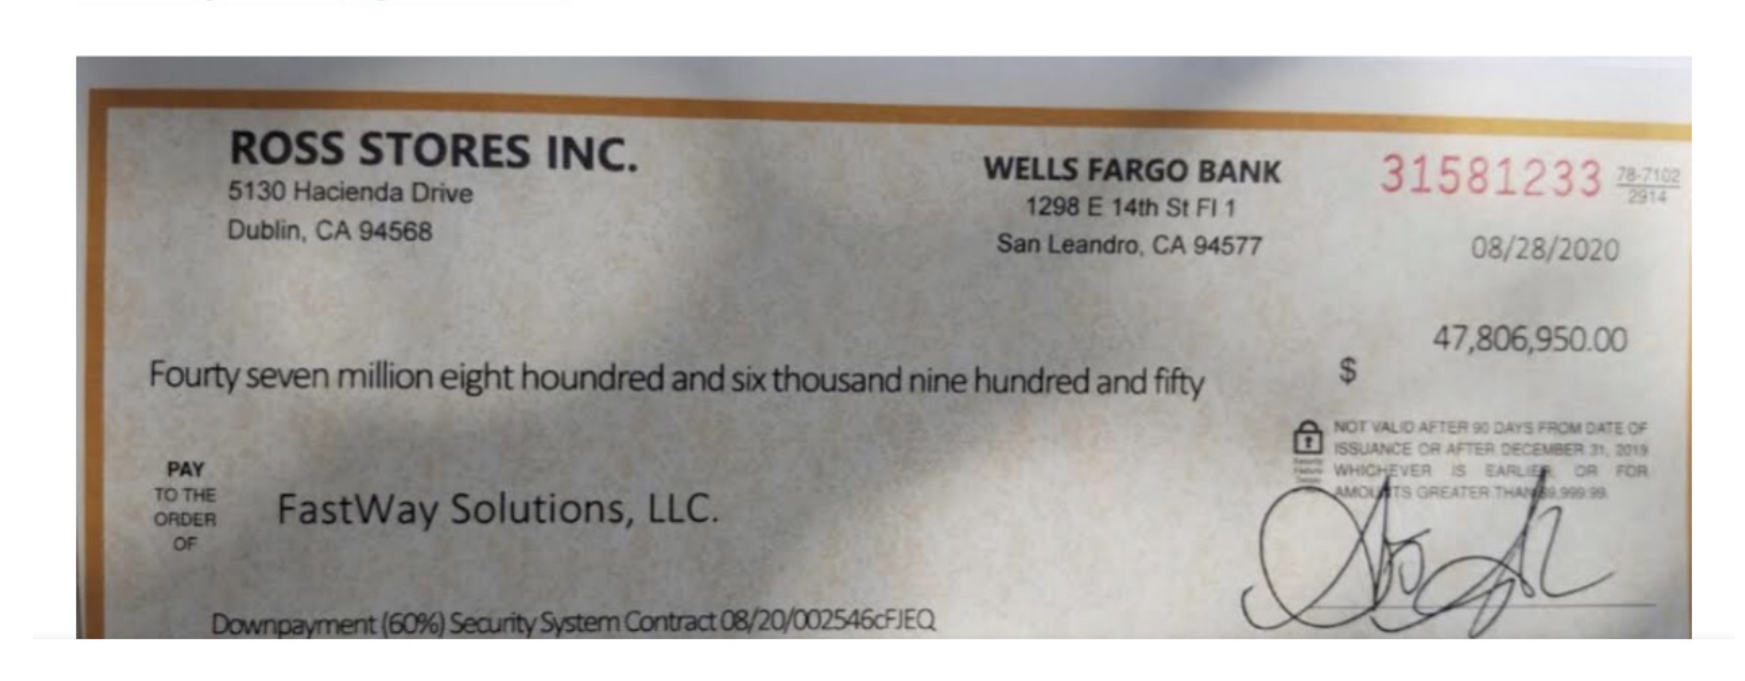 Fake check by Jose Quezada to show a fake contract